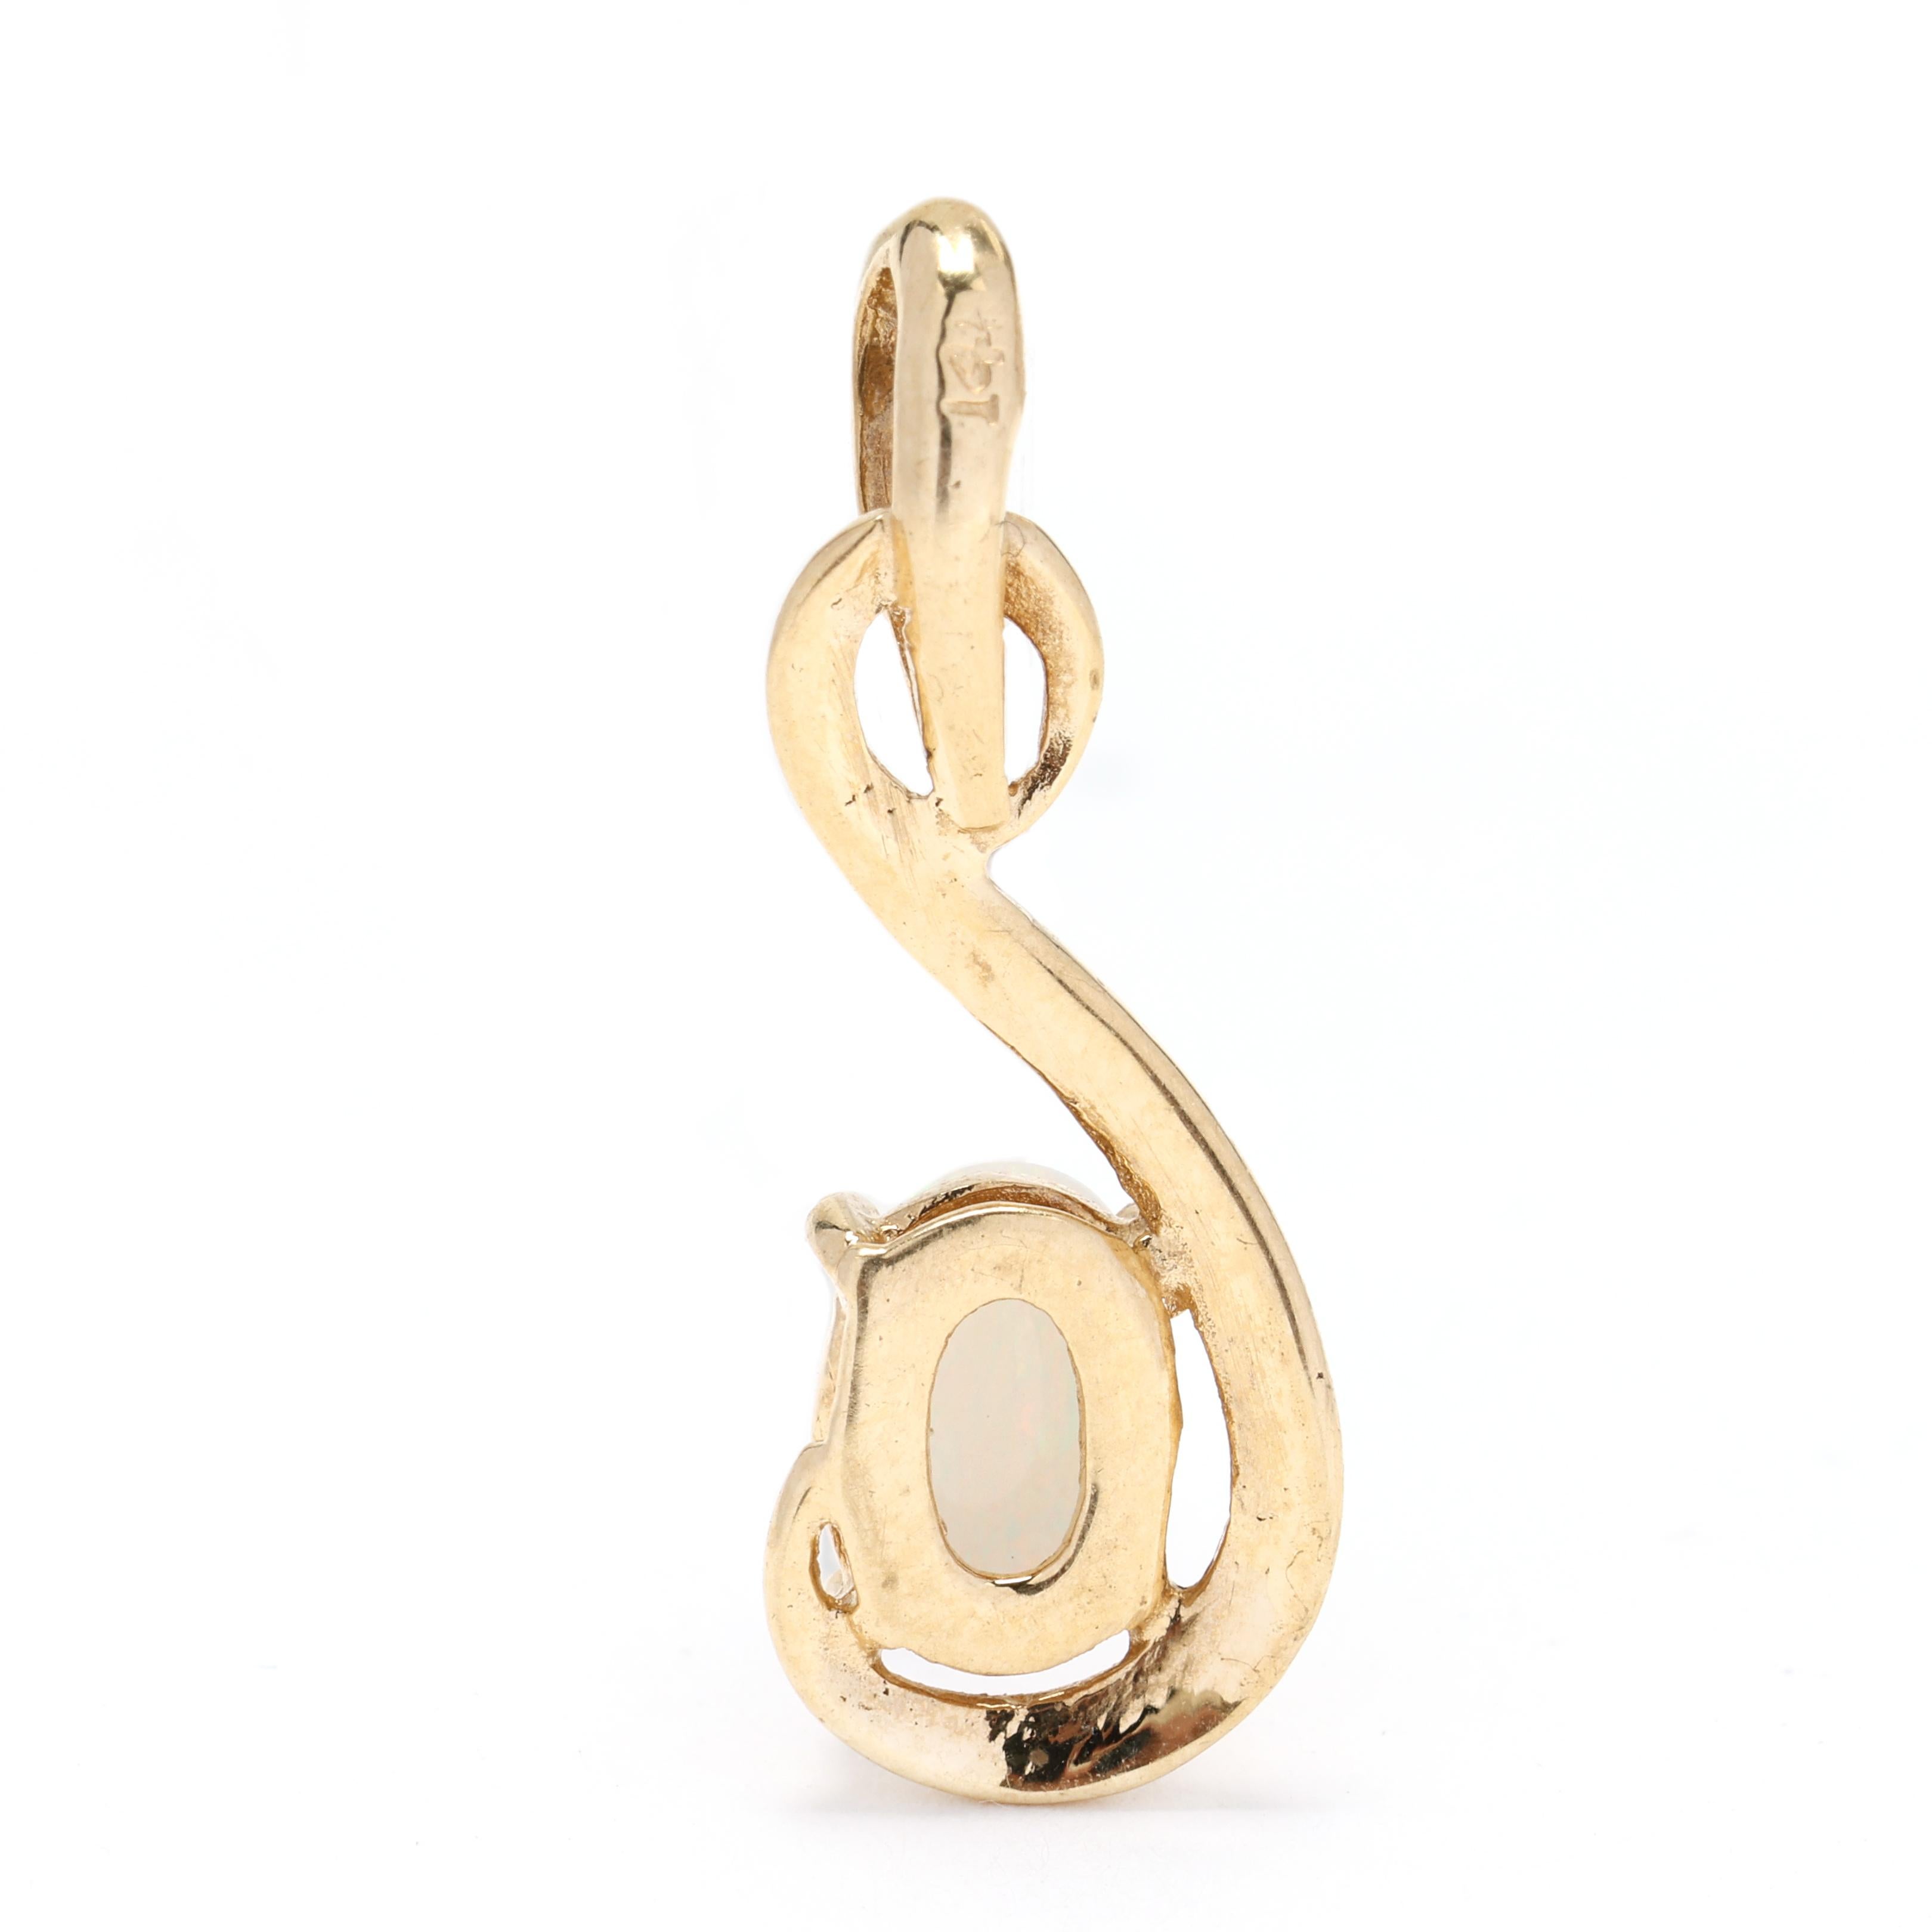 This stunning Opal Twisted Pendant is a perfect accessory to add some sparkle to your everyday look. The pendant is made from 14k yellow gold, giving it a warm and luxurious feel. The opal gemstone is known for its iridescent play-of-color, which